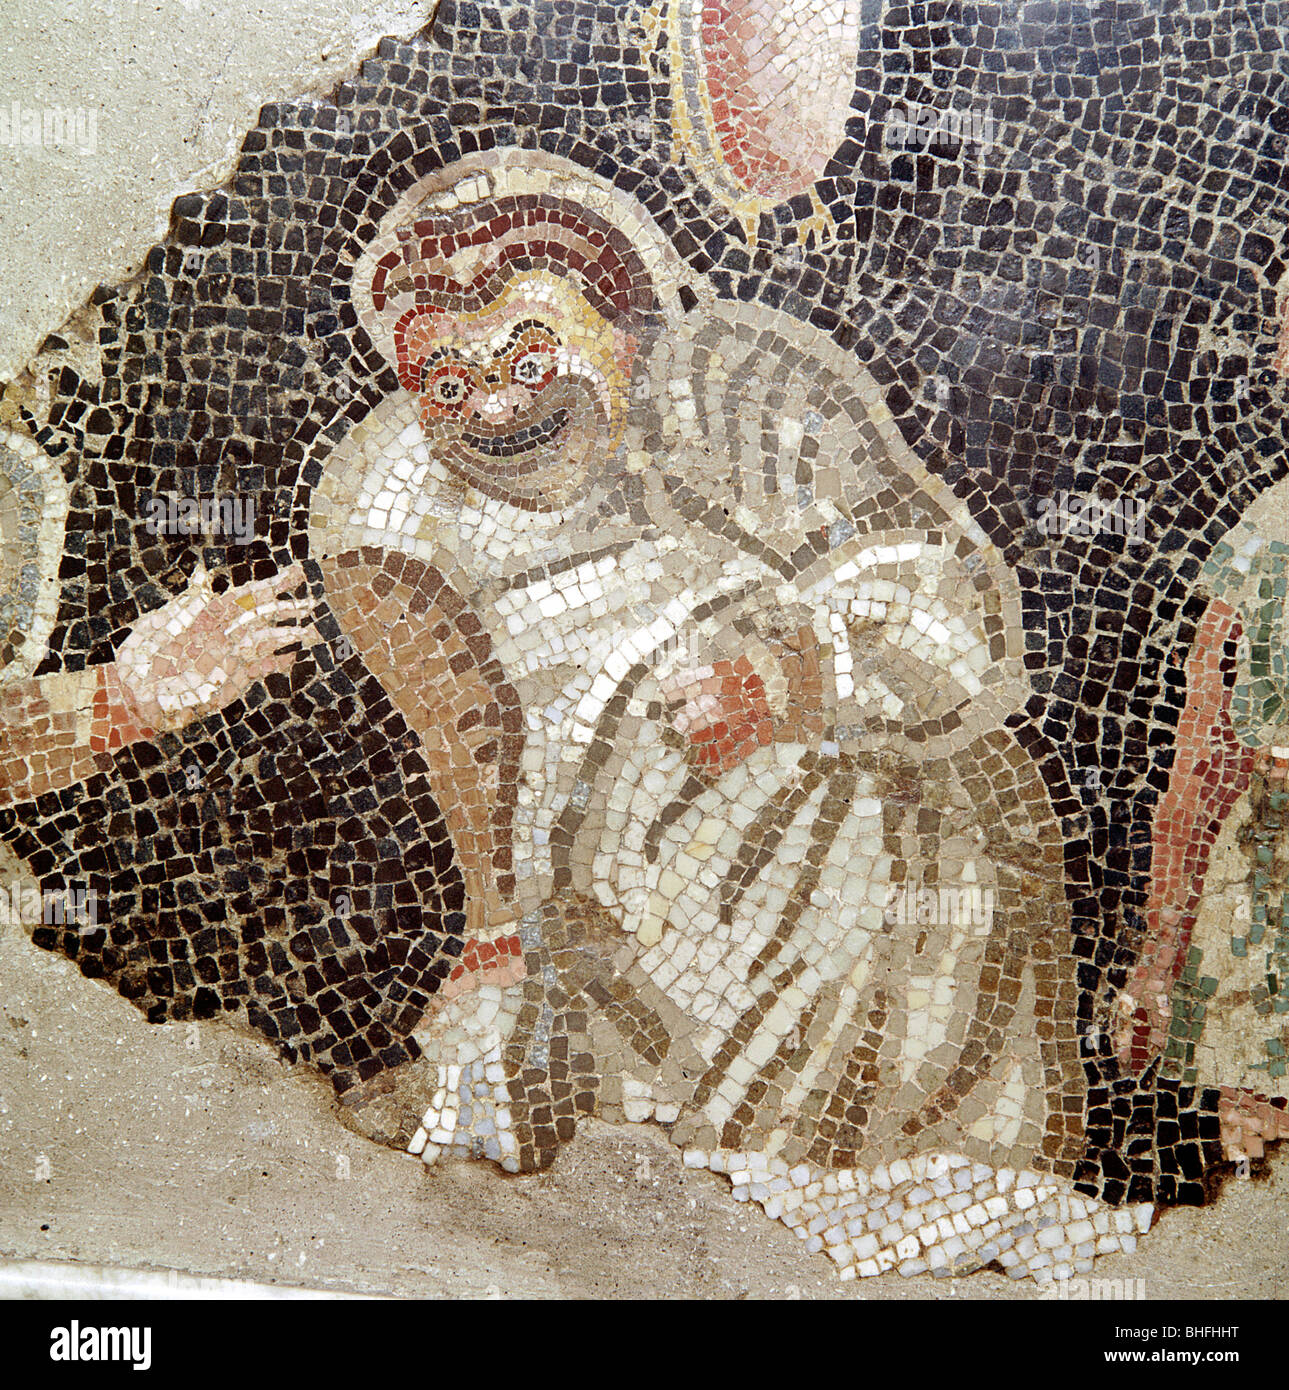 File:Mosaic depicting theatrical masks of Tragedy and Comedy